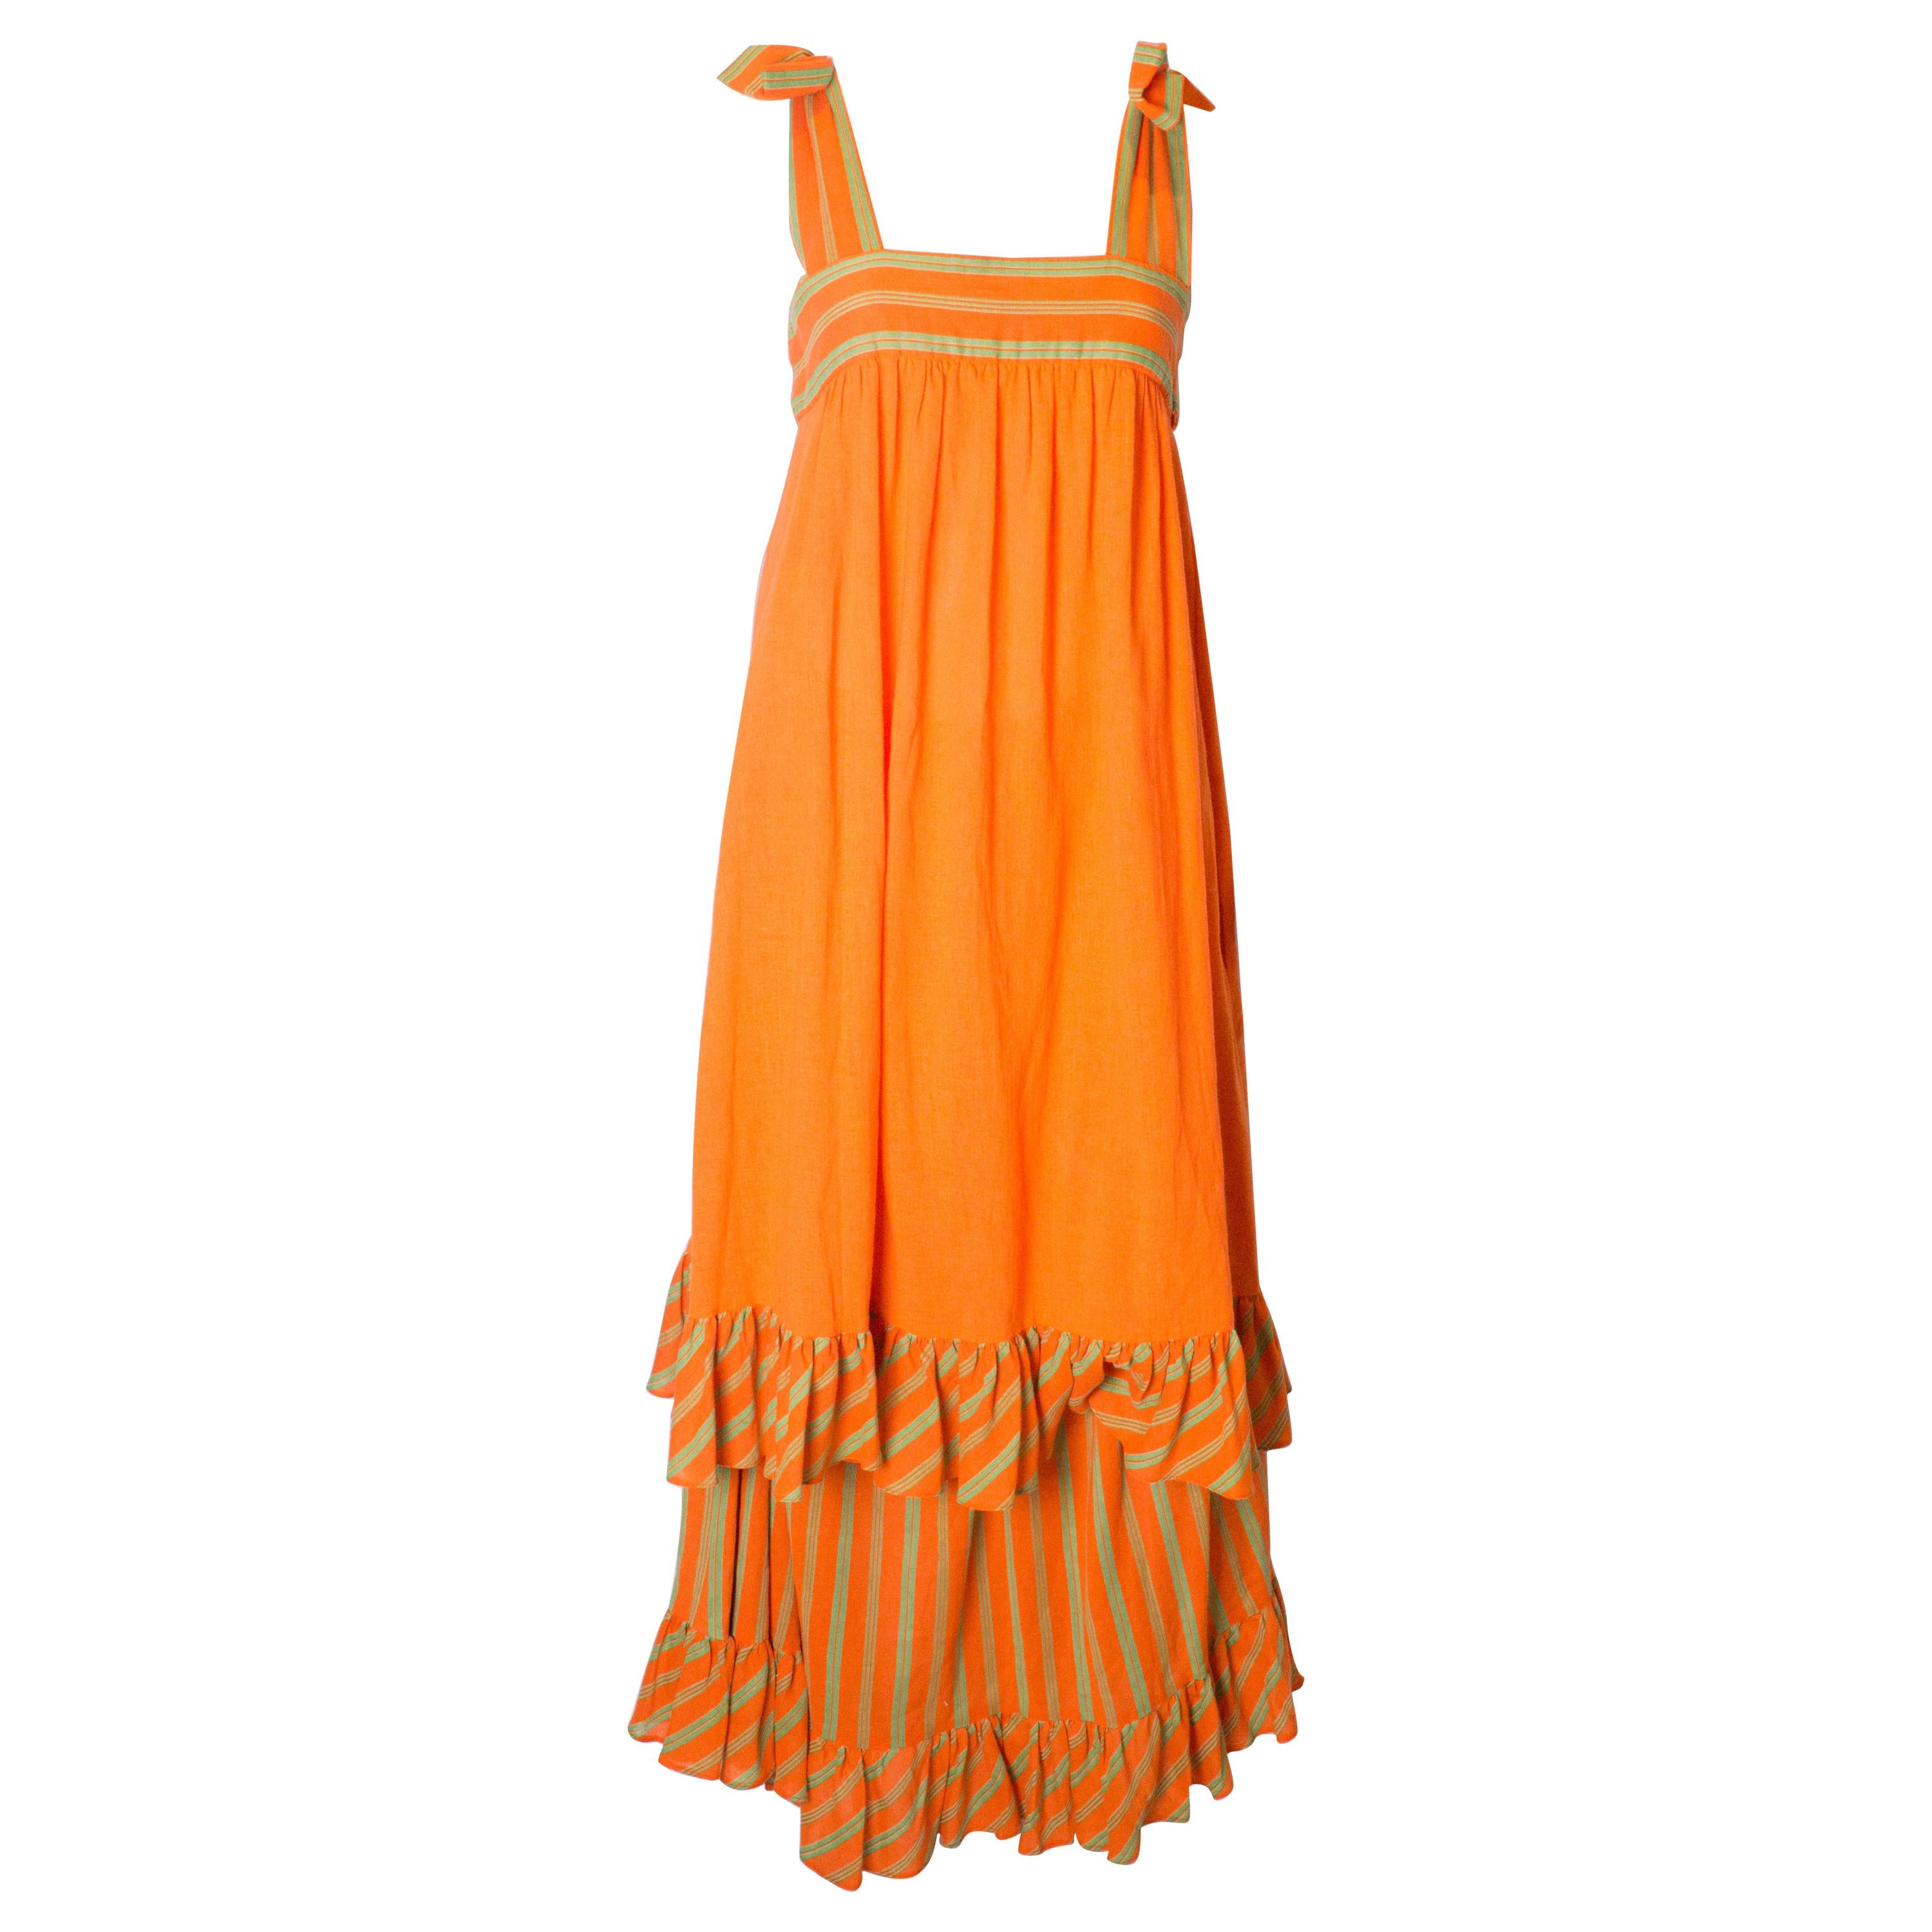 Gina Fratini ombred silk chiffon gown at 1stDibs